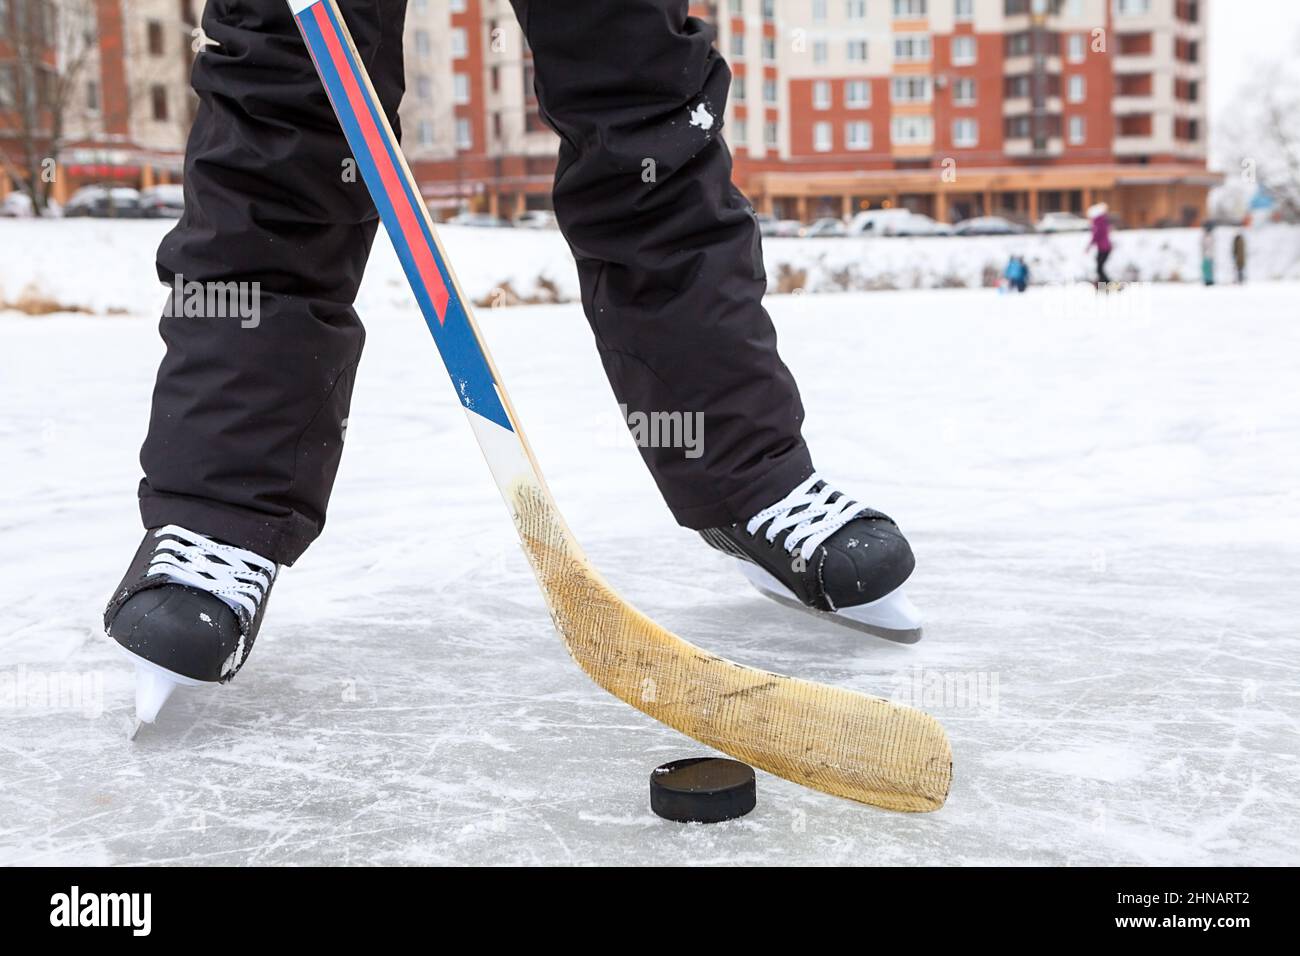 Forward holding black puck with stick, hockey skates on a lake ice, teenage male legs, front view Stock Photo